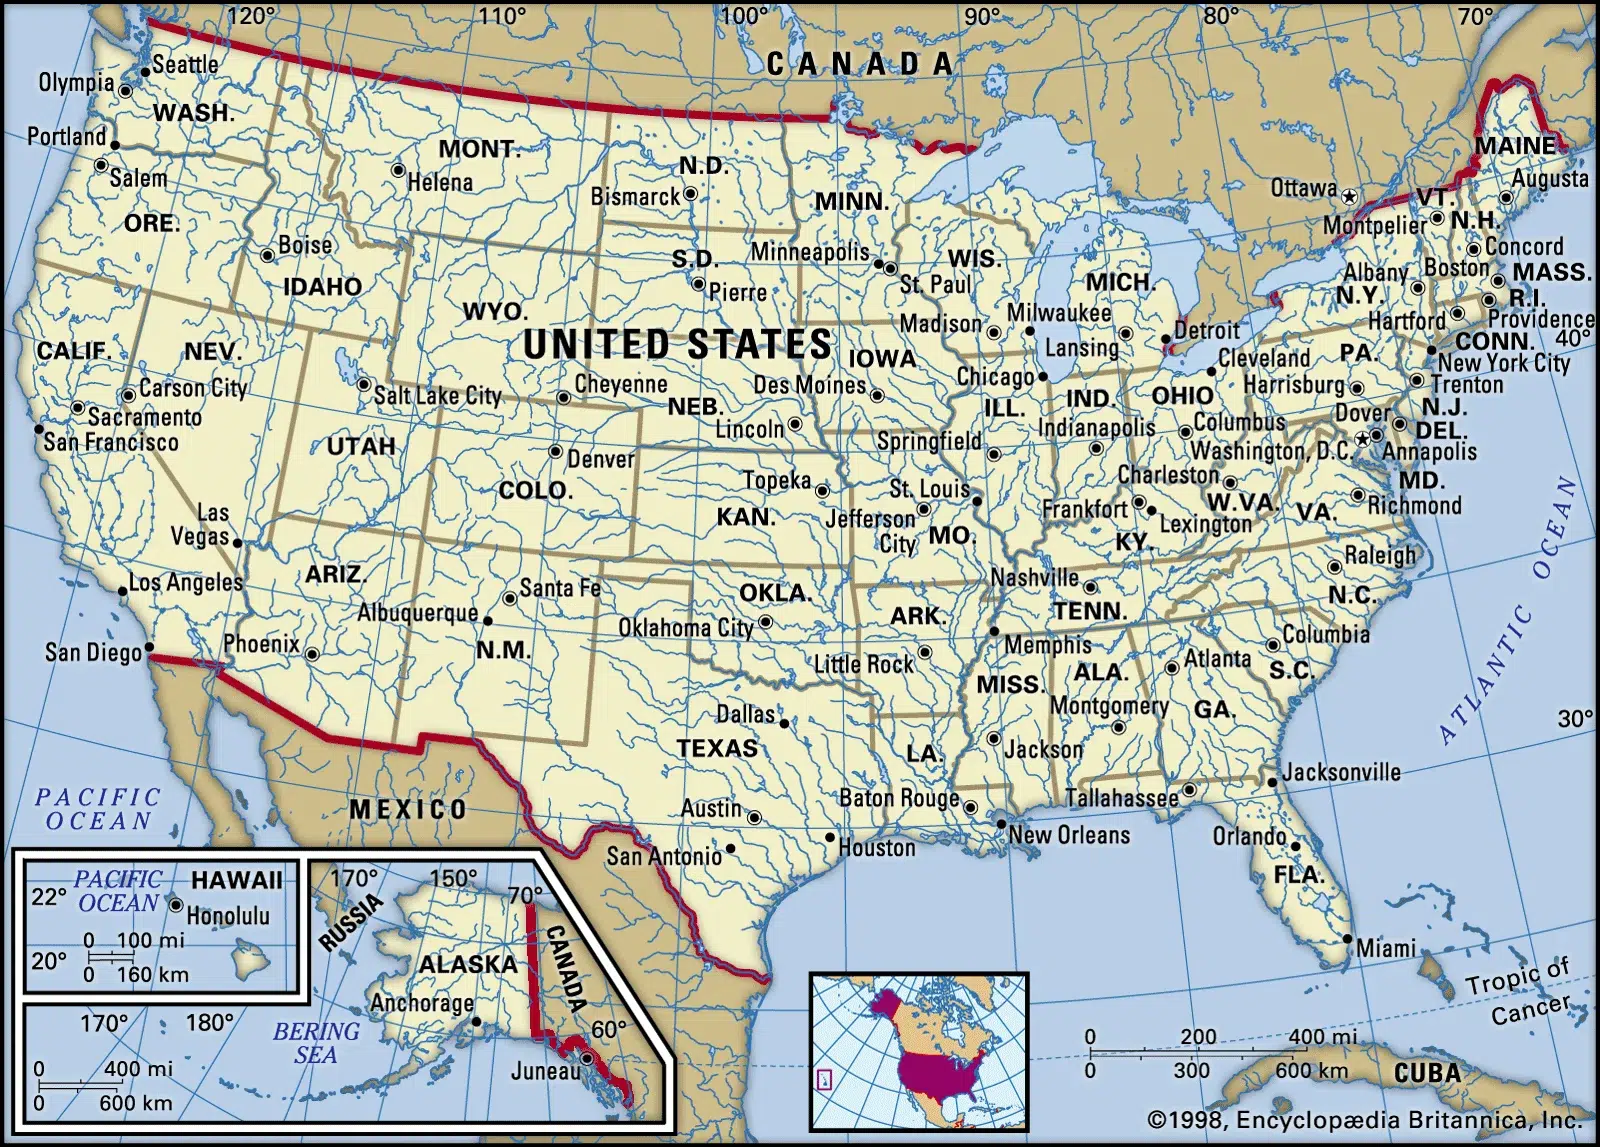 Detailed map of the United States with cities and states.